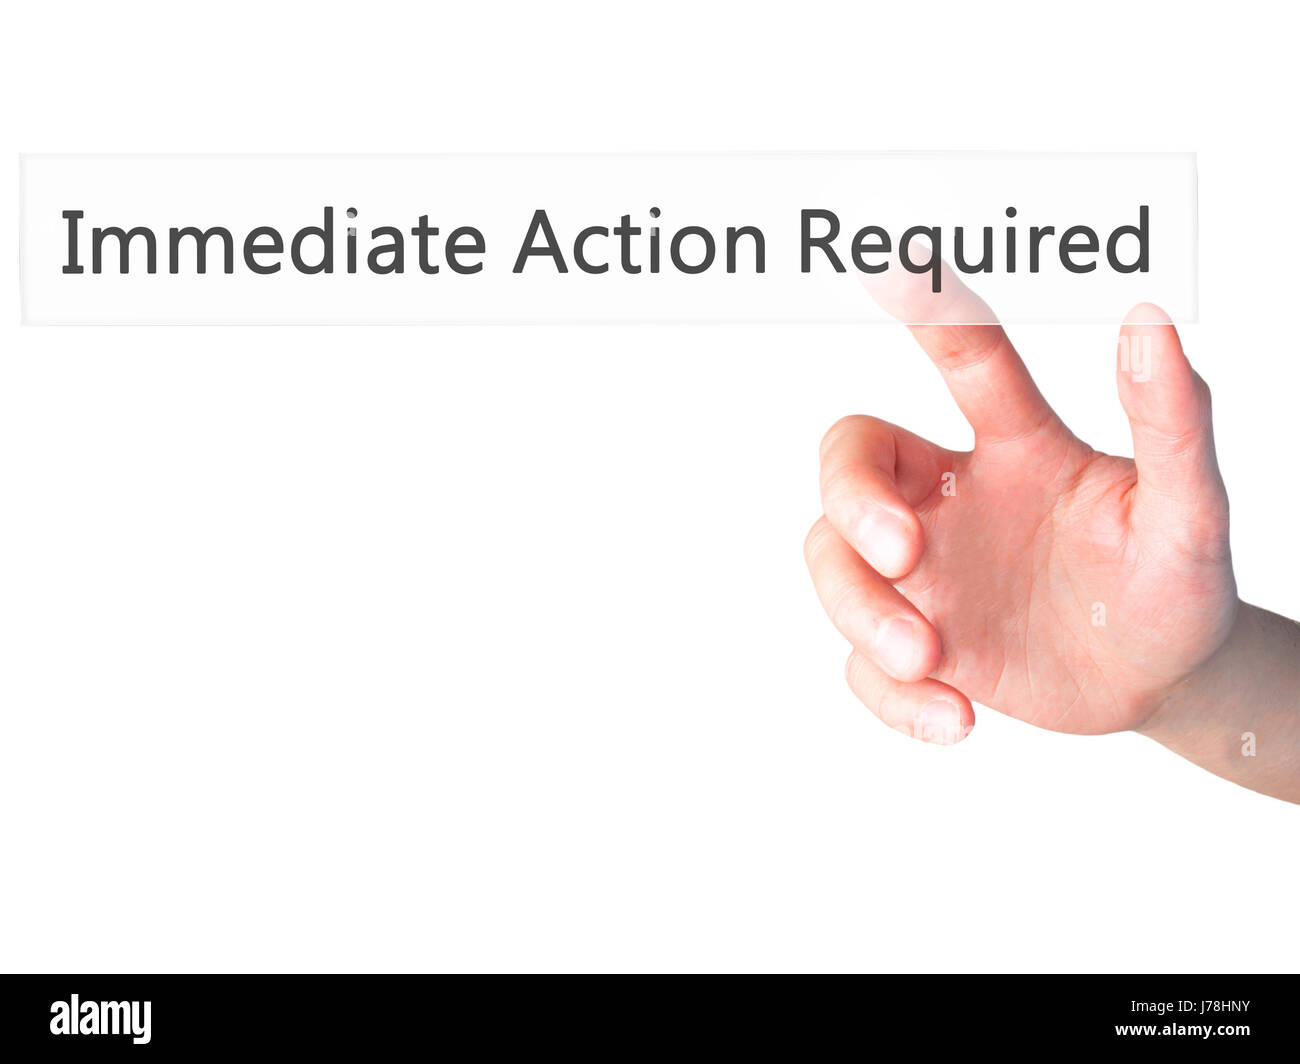 Immediate Action Required - Hand pressing a button on blurred background concept . Business, technology, internet concept. Stock Photo Stock Photo